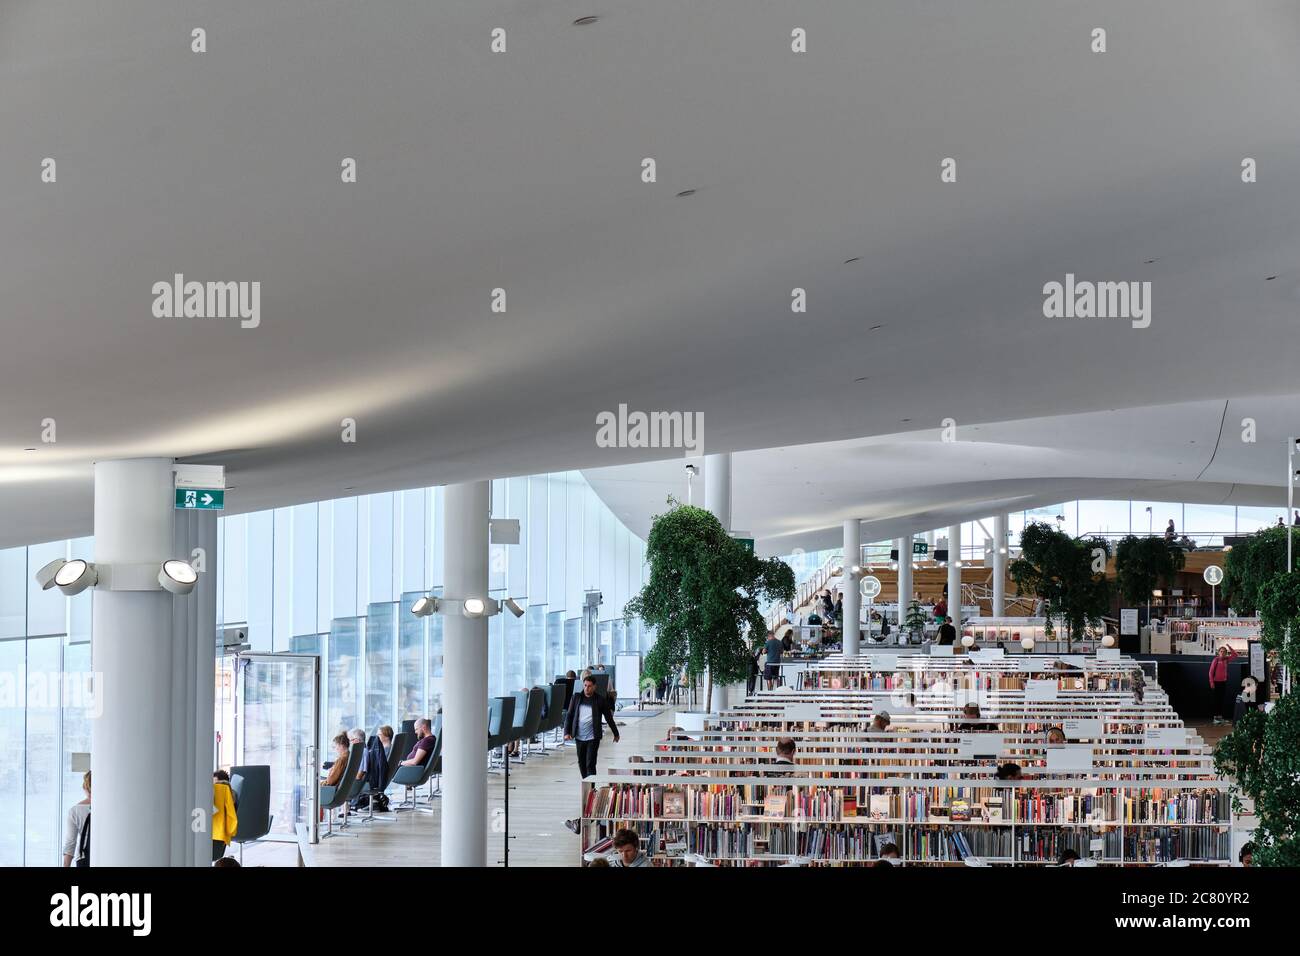 Helsinki, Finland - July 1, 2020: The interior of the brand new Oodi library. Oodi library in Top 100 World's Greatest Places by Time magazine. Stock Photo